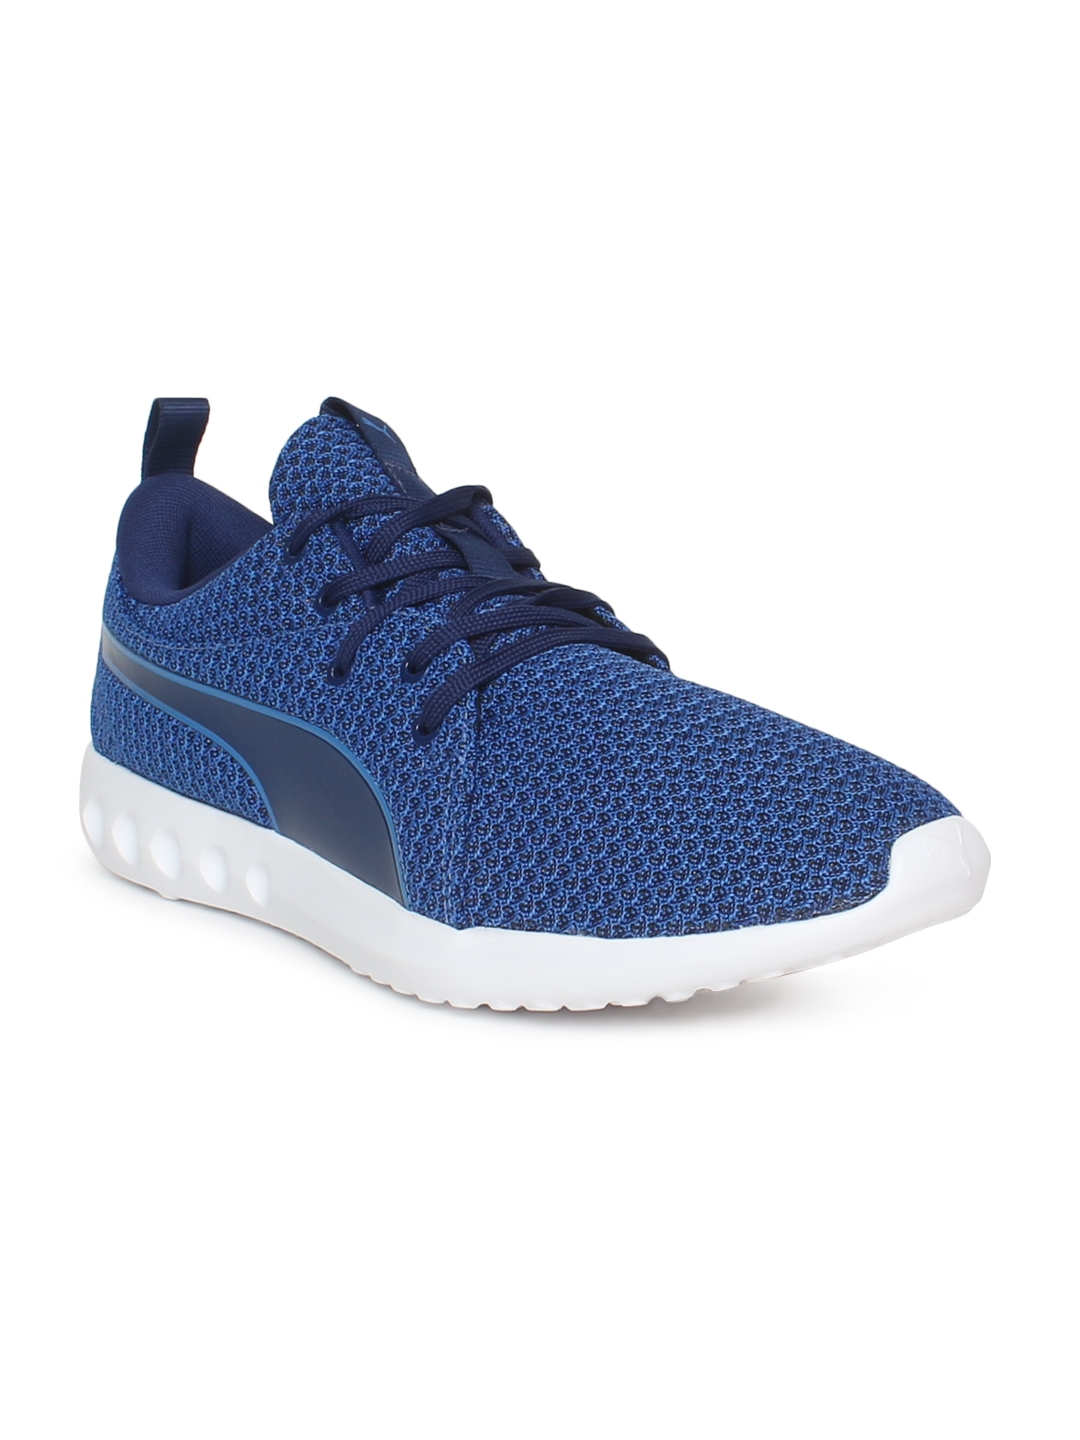 Buy Puma Unisex Blue Carson 2 Knit Running Shoes - Sports Shoes for ...